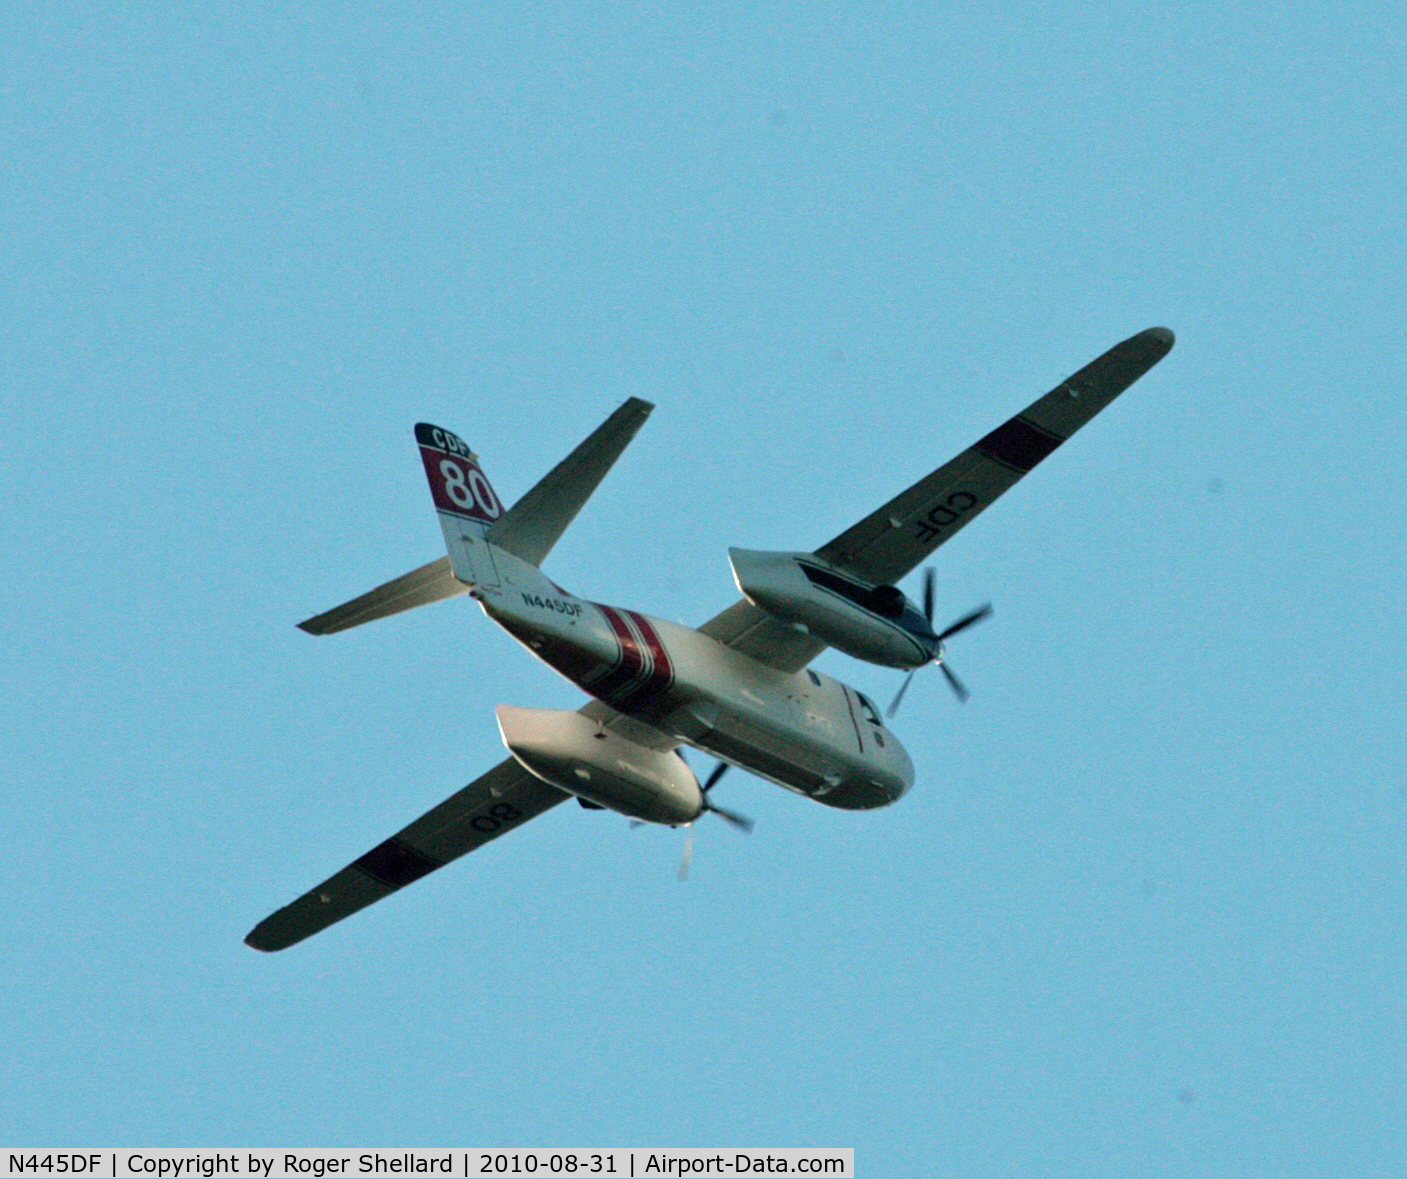 N445DF, Grumman S2F-1 Tracker C/N 152, One of two circling a fire in Soquel CA as it passed over our house late afternoon sun was a problem so had to let it pass over  hence rear shot